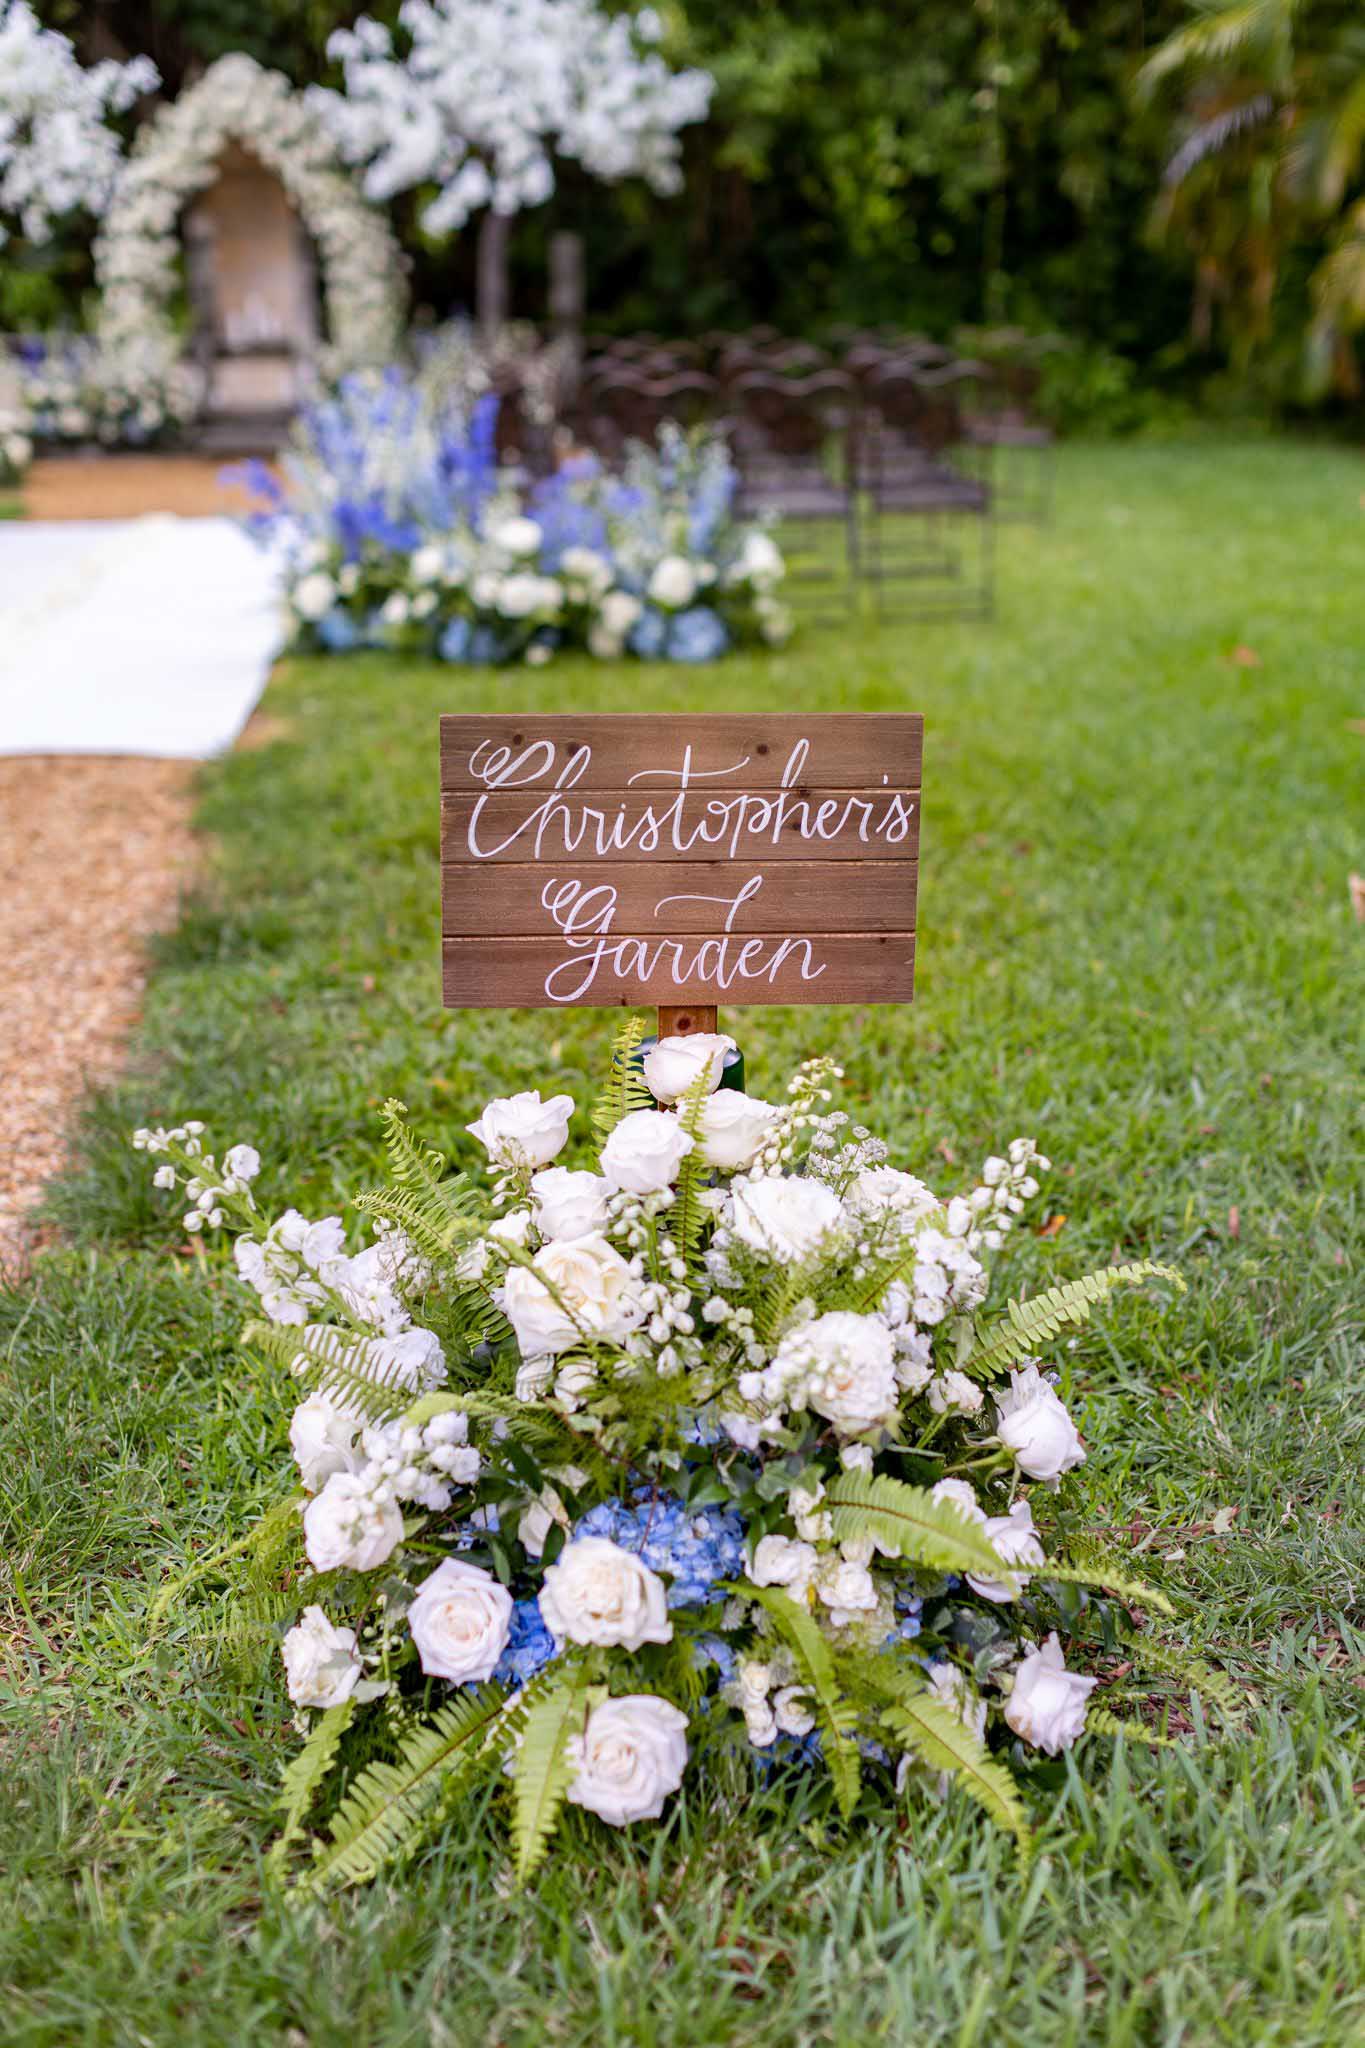 wooden sign Christopher's Garden and white and blue flowers